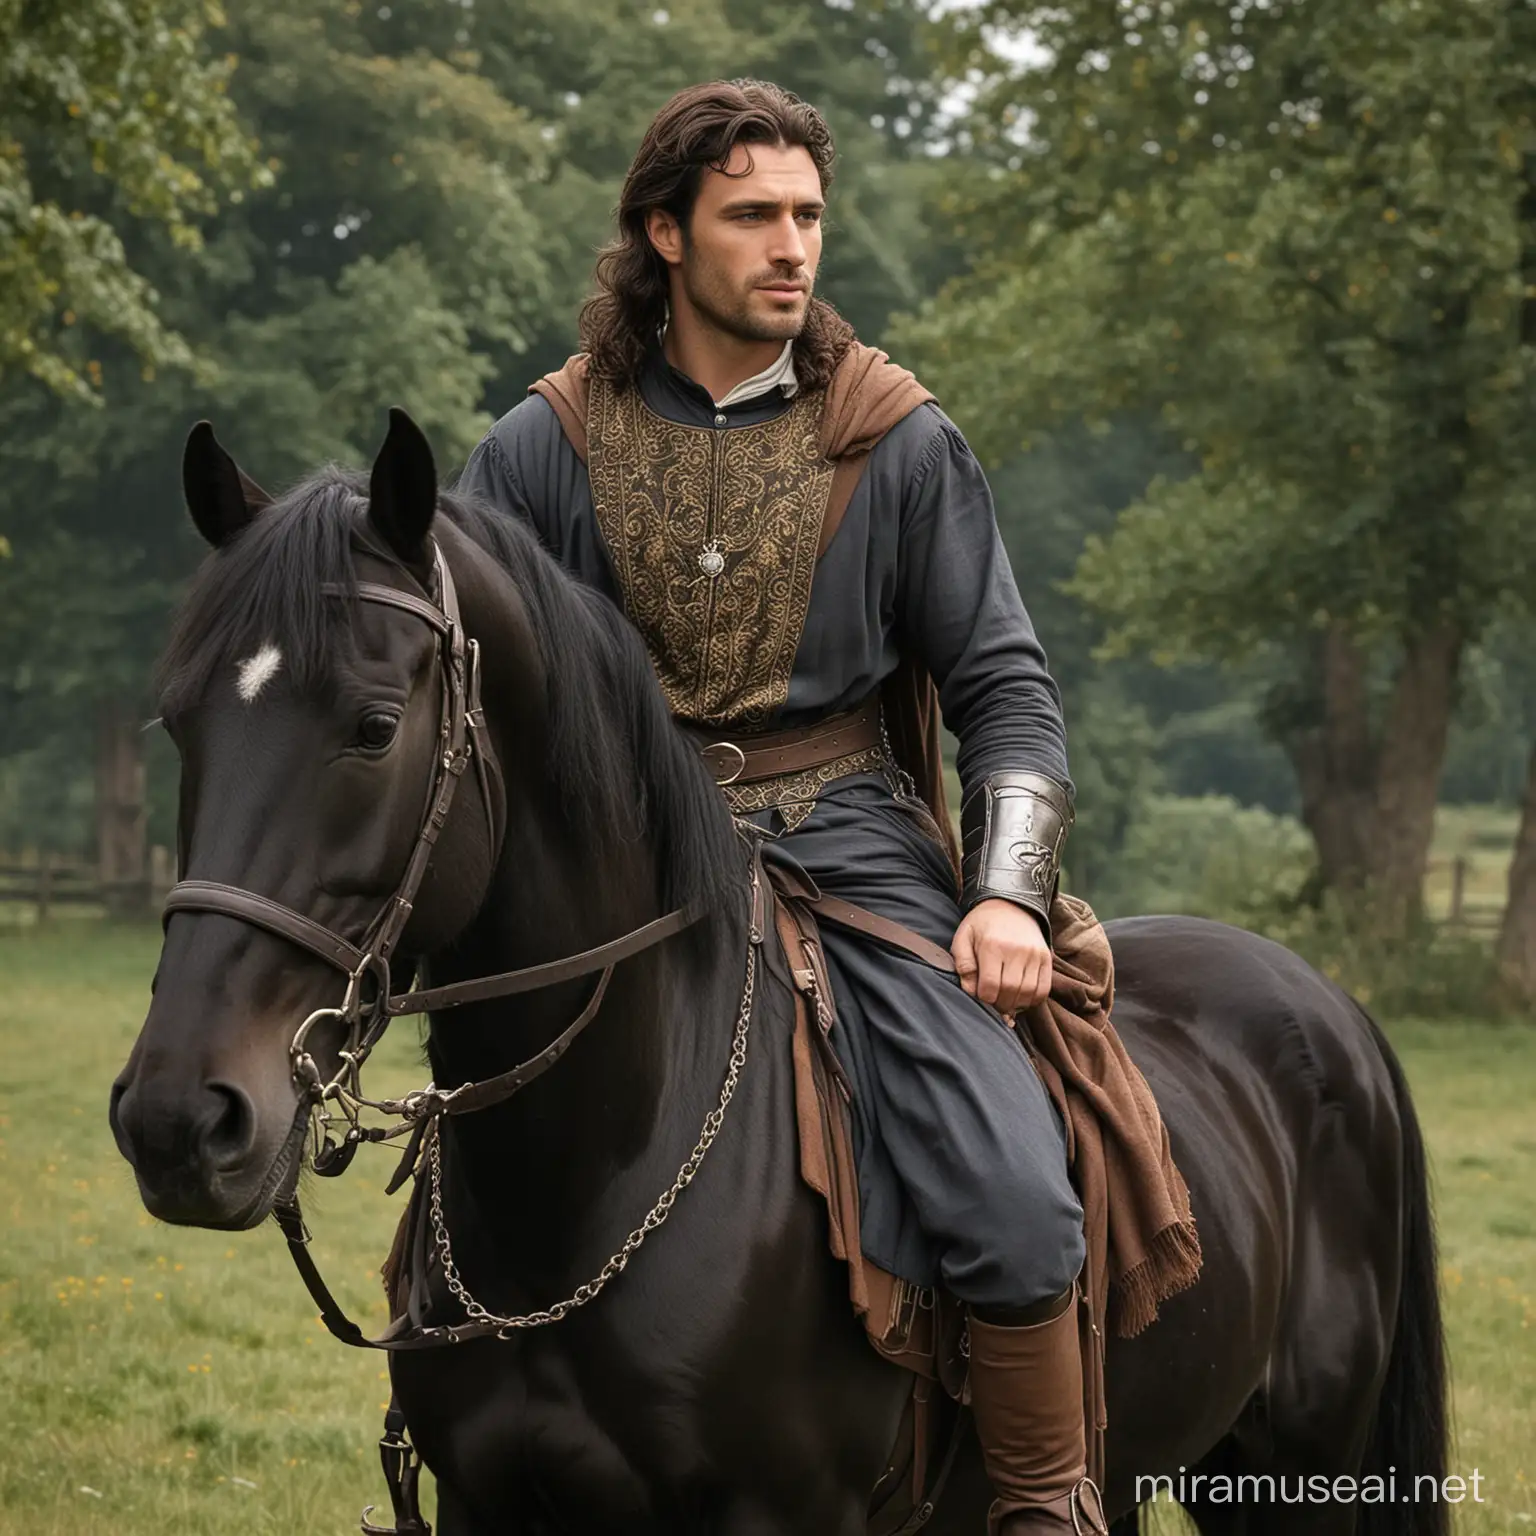 An ideal man above 40 years old an independent, freedom-loving young man, tall, broad-shouldered, charismatic, all women are attracted to him. He has a black horse. A hero of the twelfth century.